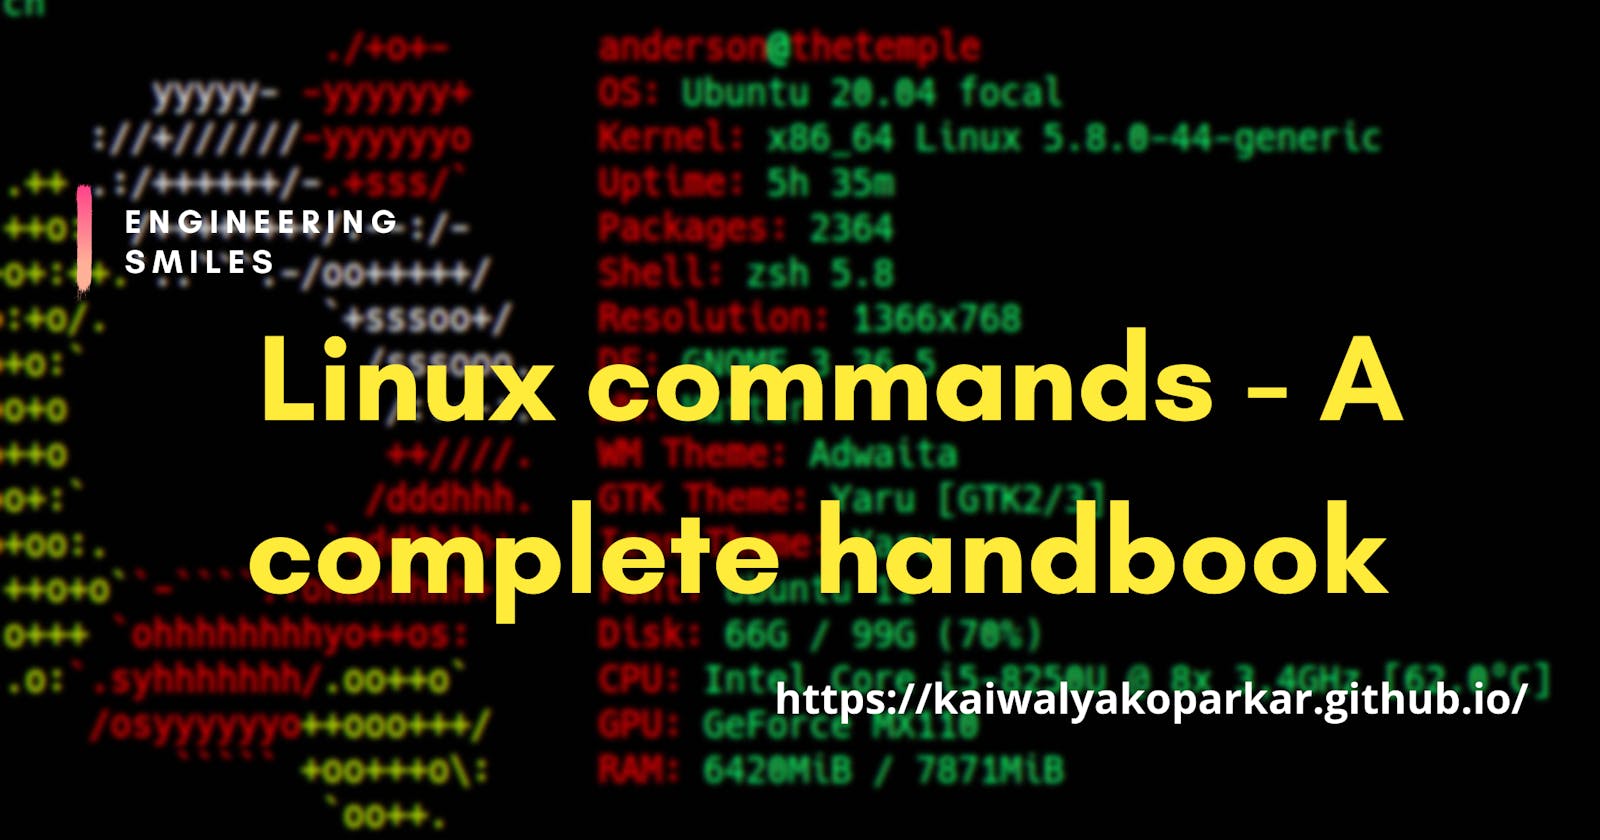 🐧 Linux Commands - A Complete Handbook for beginners 💻